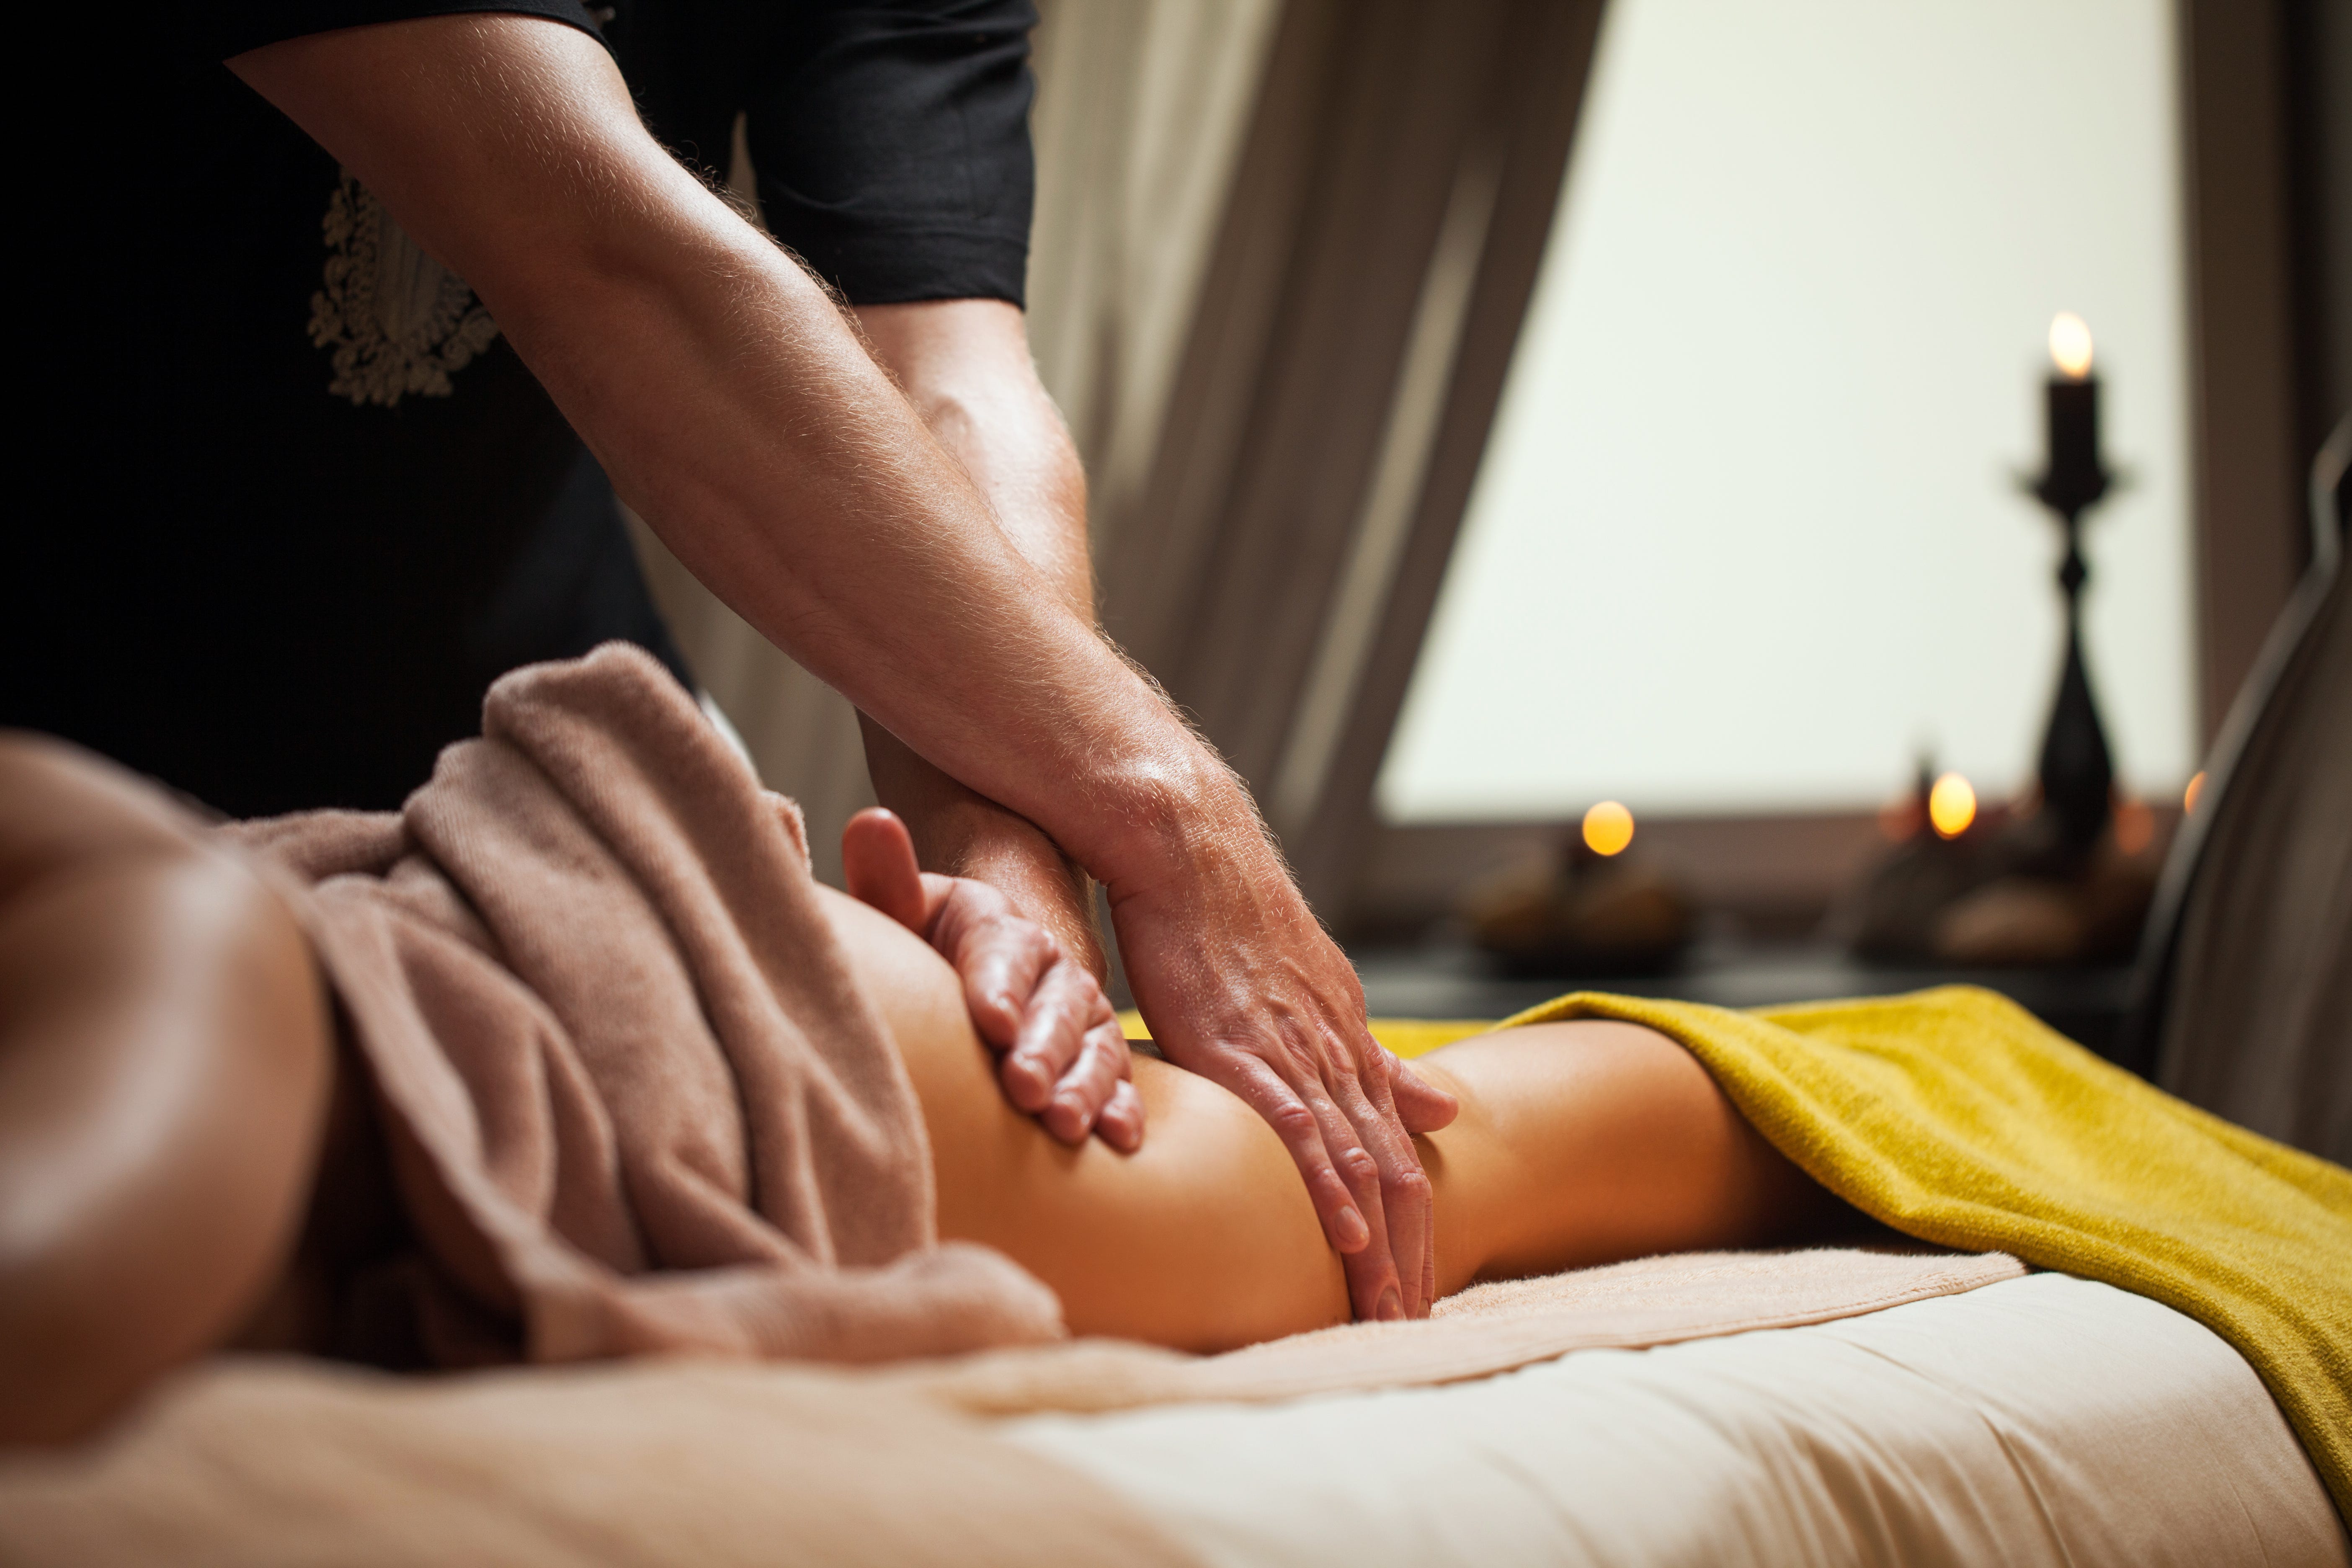 How to Give Her a Sensual Massage by Emma Austin Love, Emma Medium